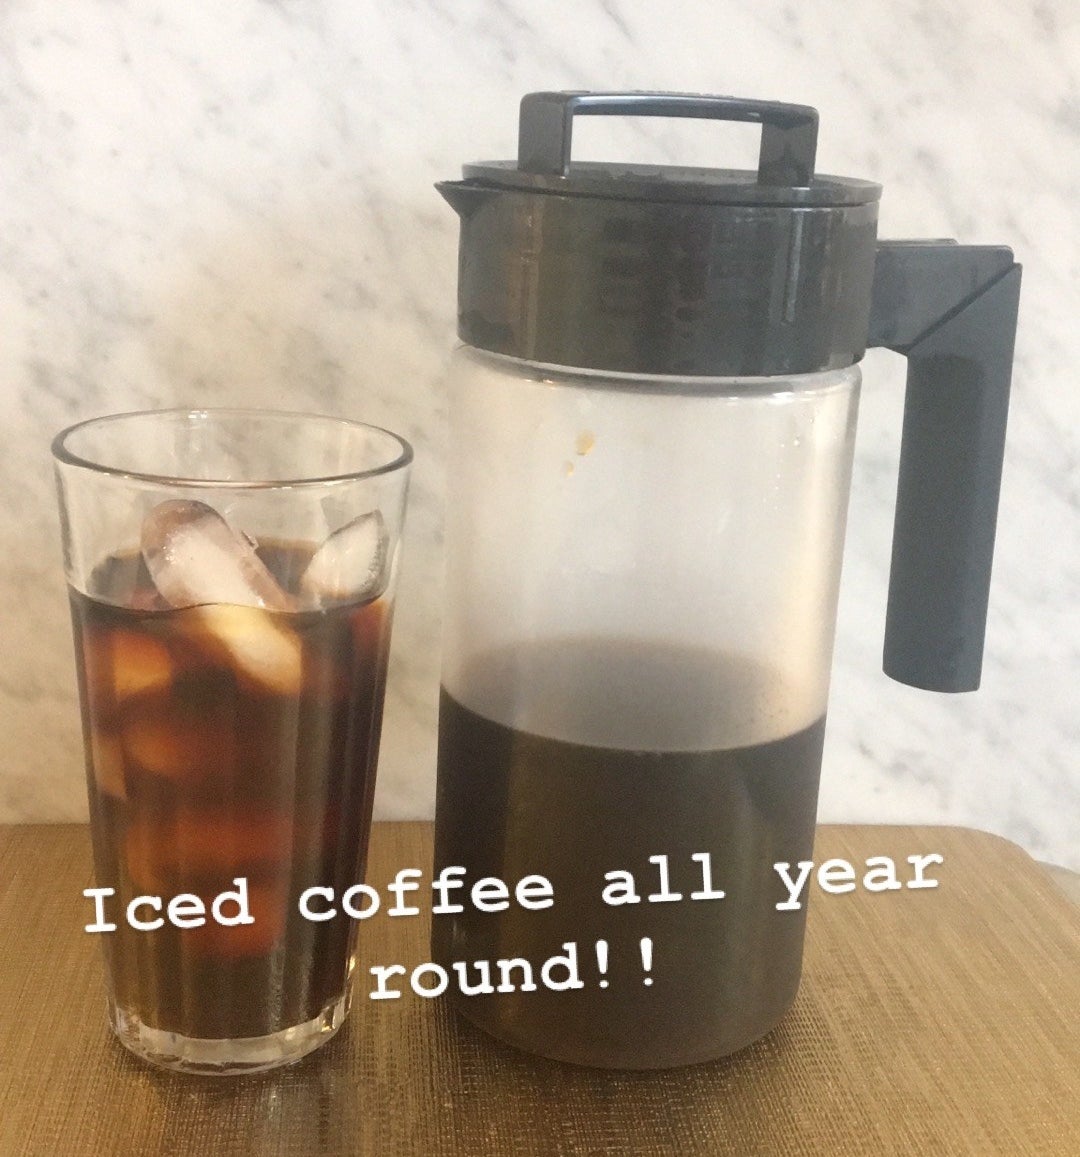 BuzzFeed Editor Maitland Quitmeyer shows her Takeya cold brew maker next to a glass of iced coffee in her kitchen